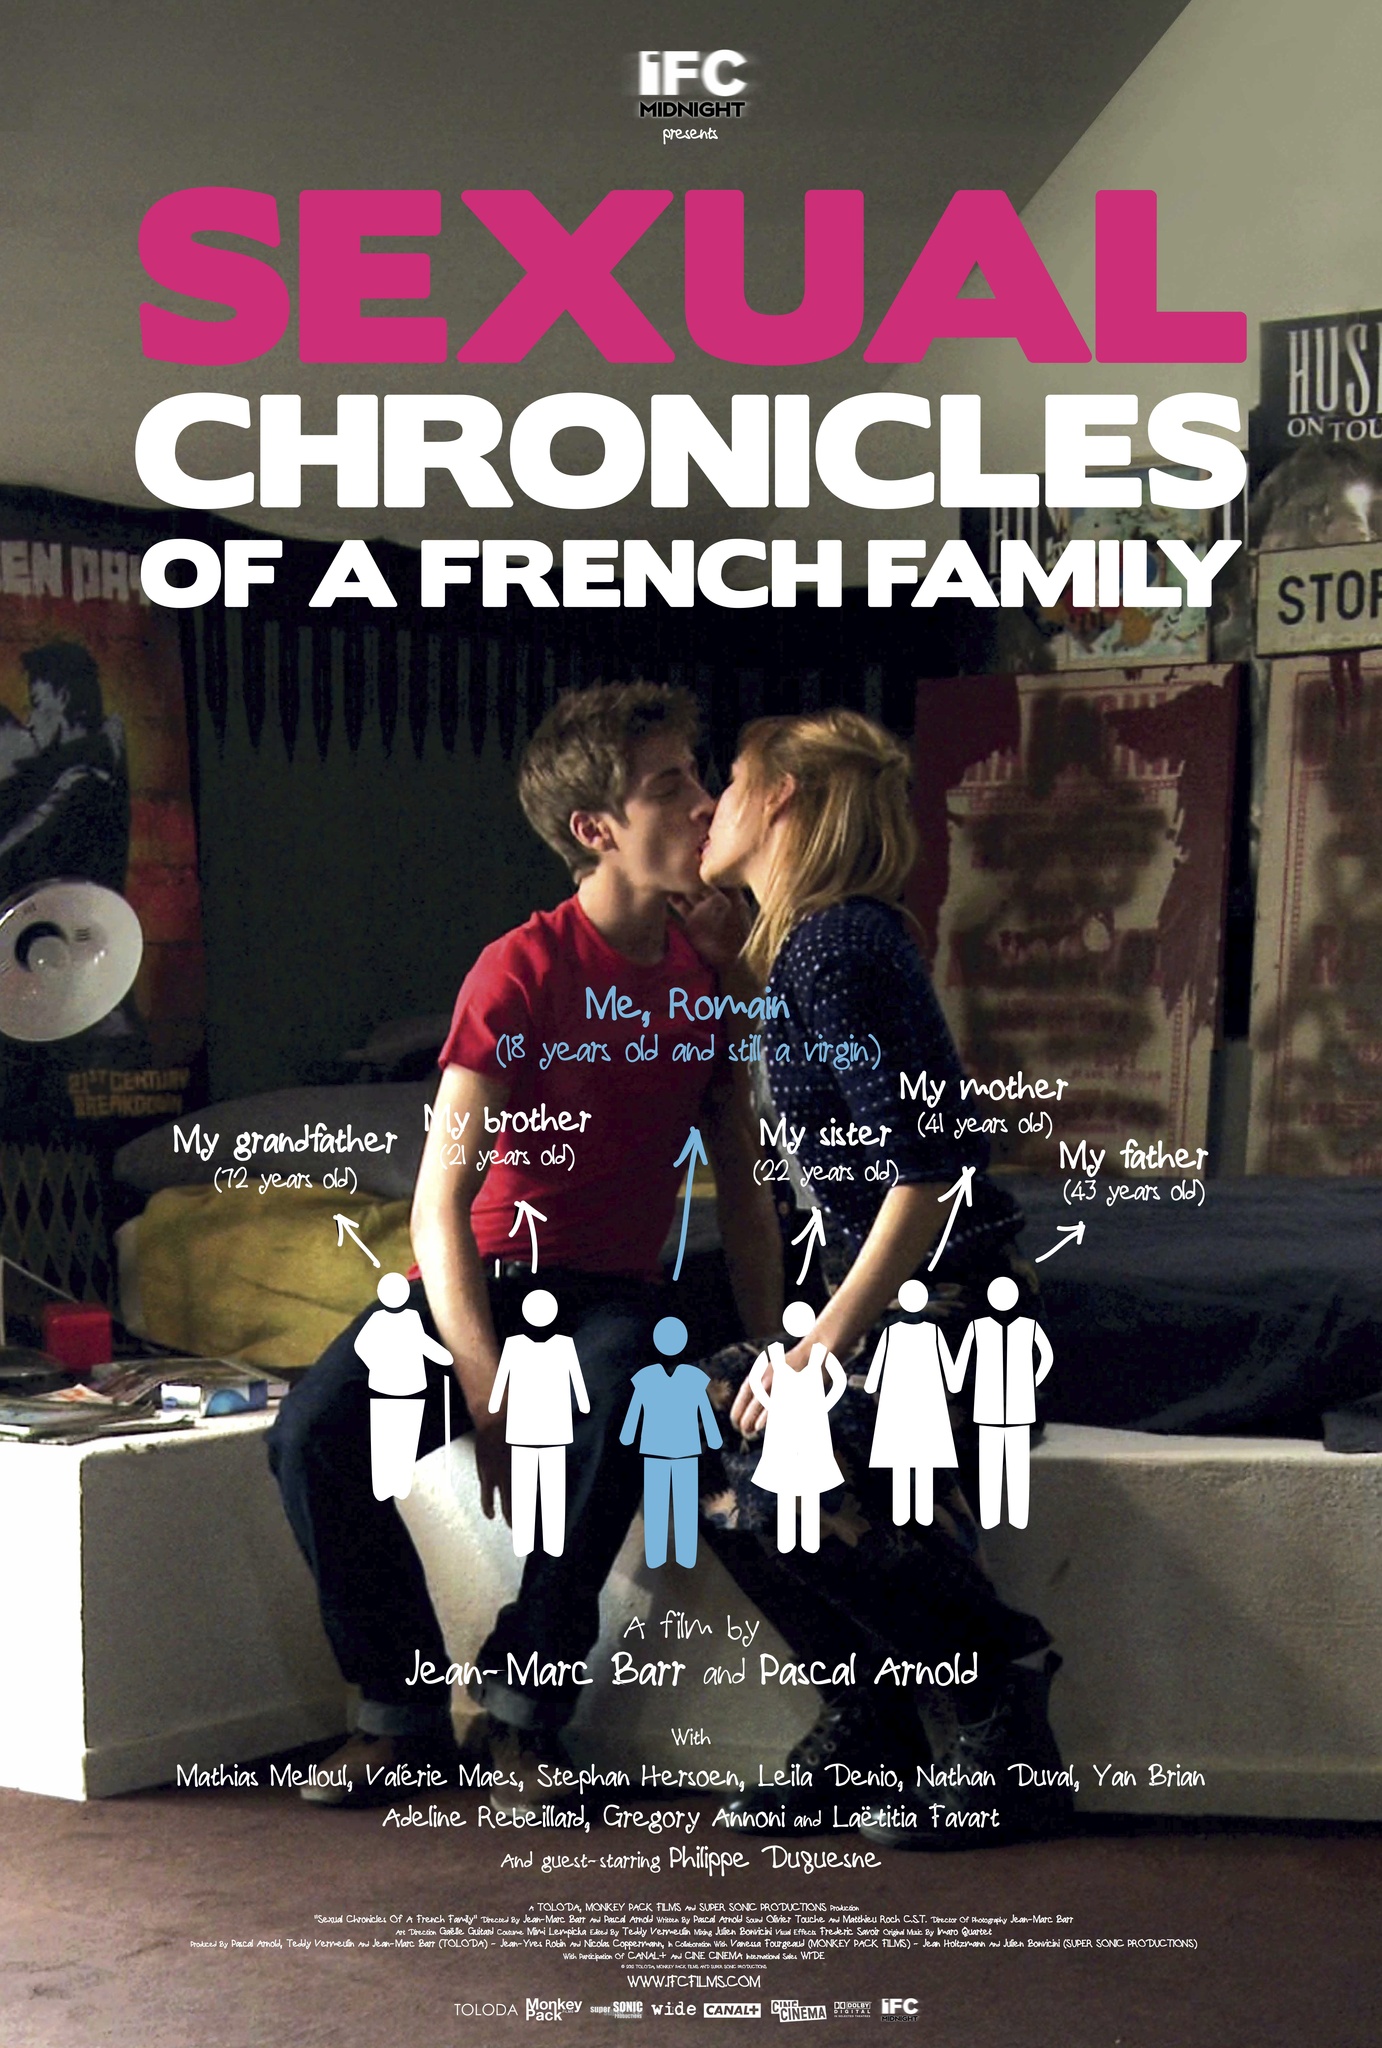 Sexual Chronicles of a French Family 2012 film scene di nudo